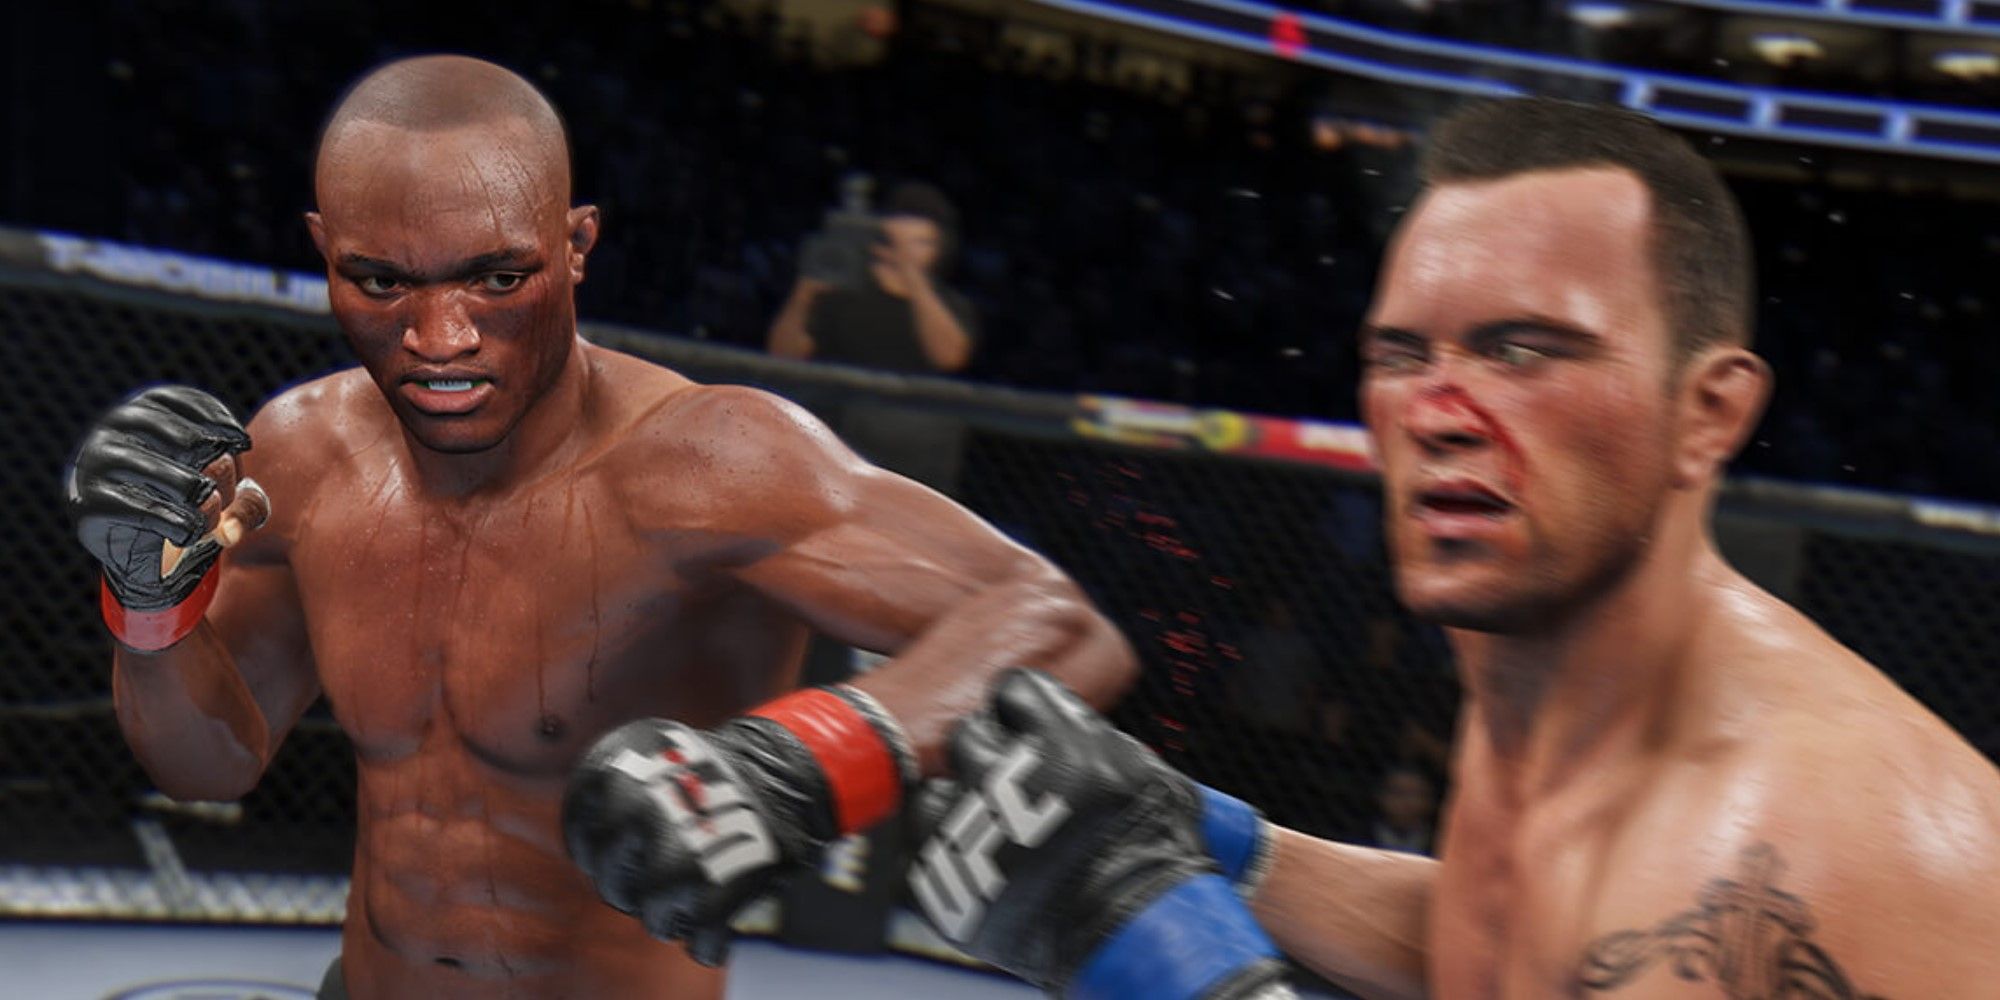 kamura usman punches colby covington in ufc 4